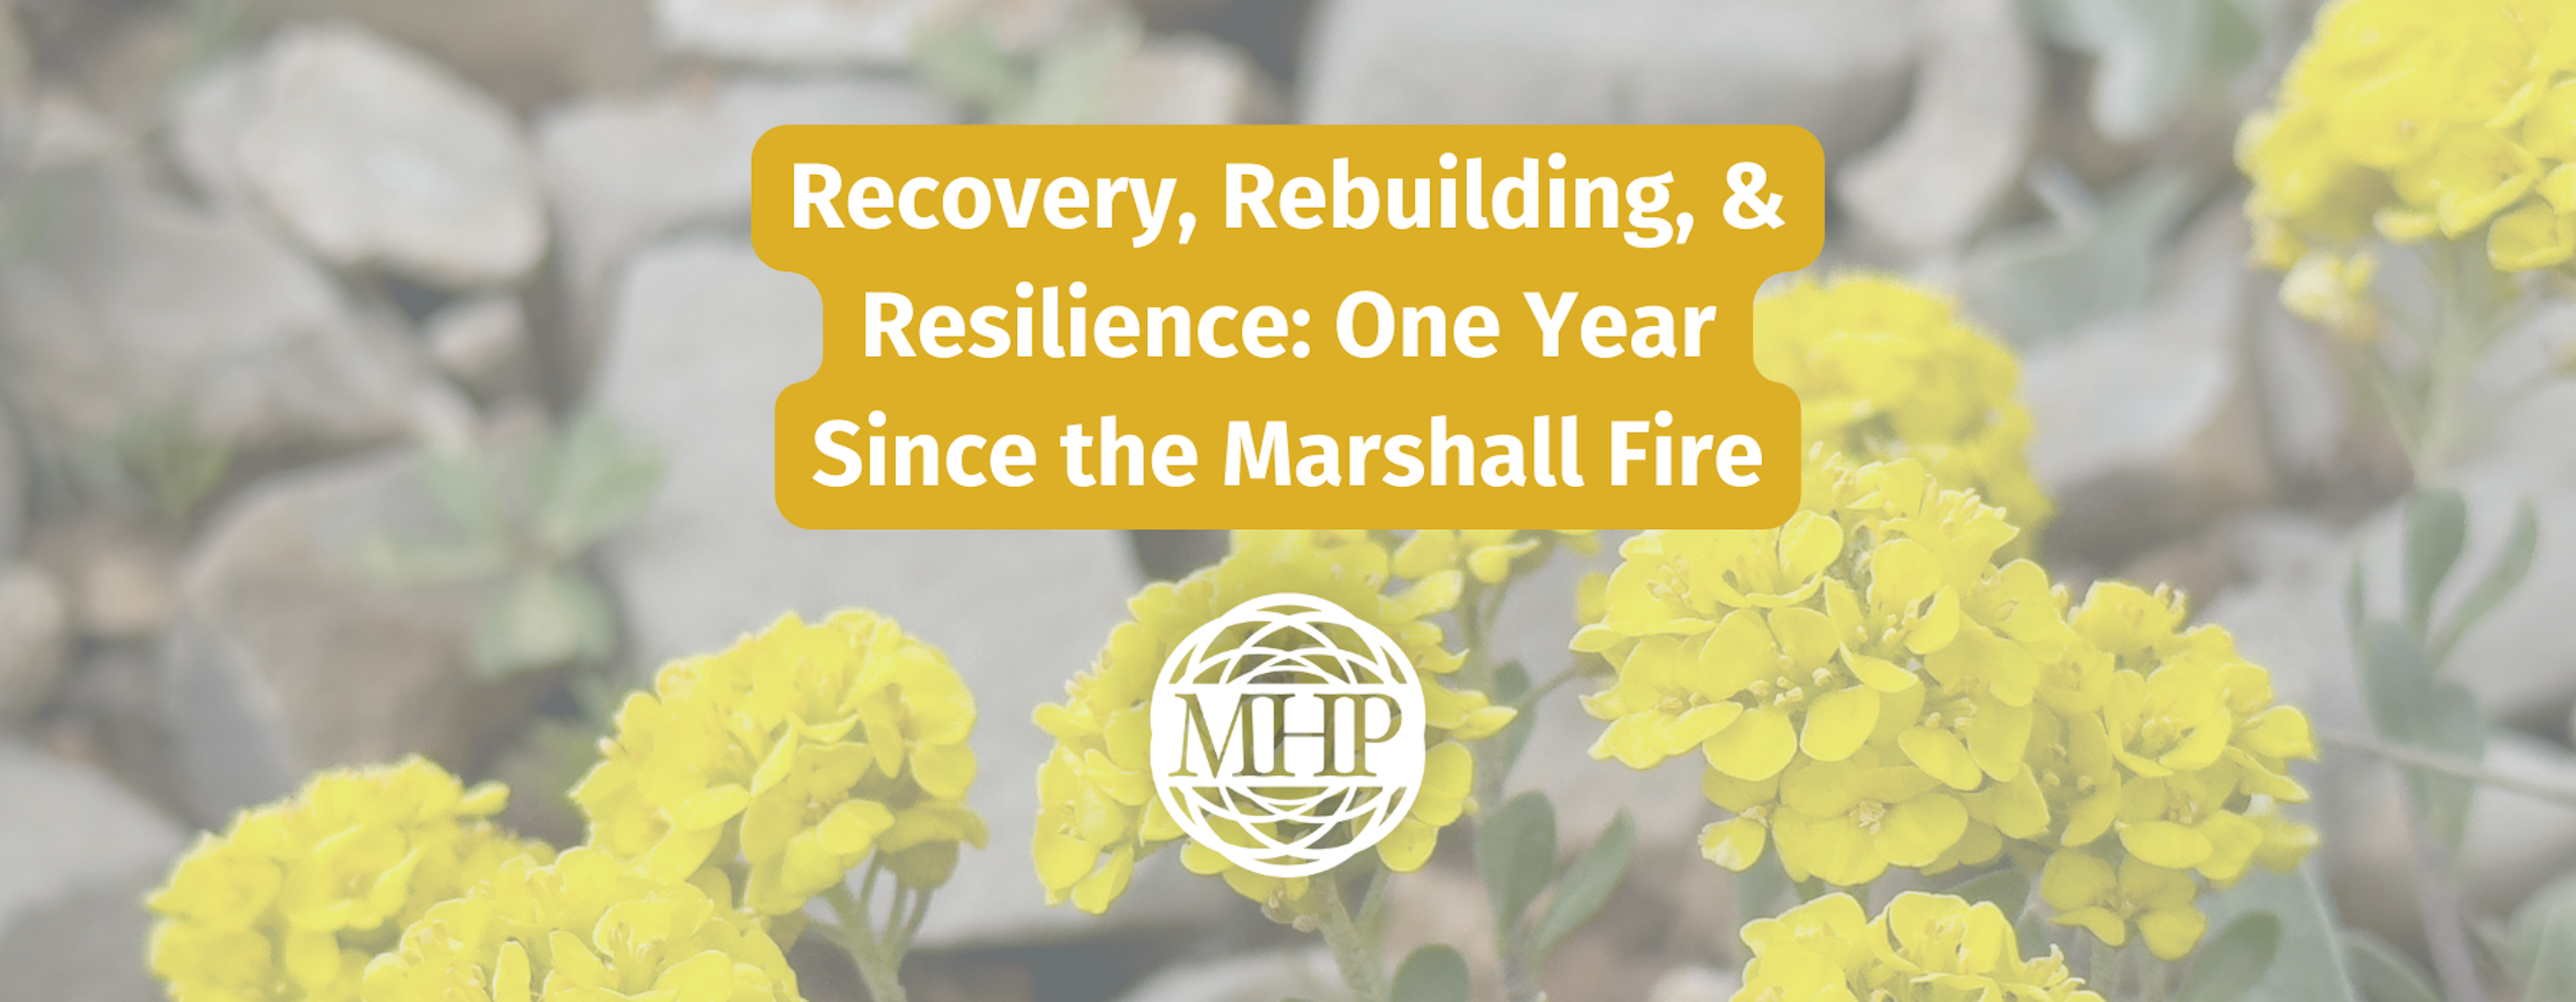 Recovery, Rebuilding, & Resilience One Year Since the Marshall Fire